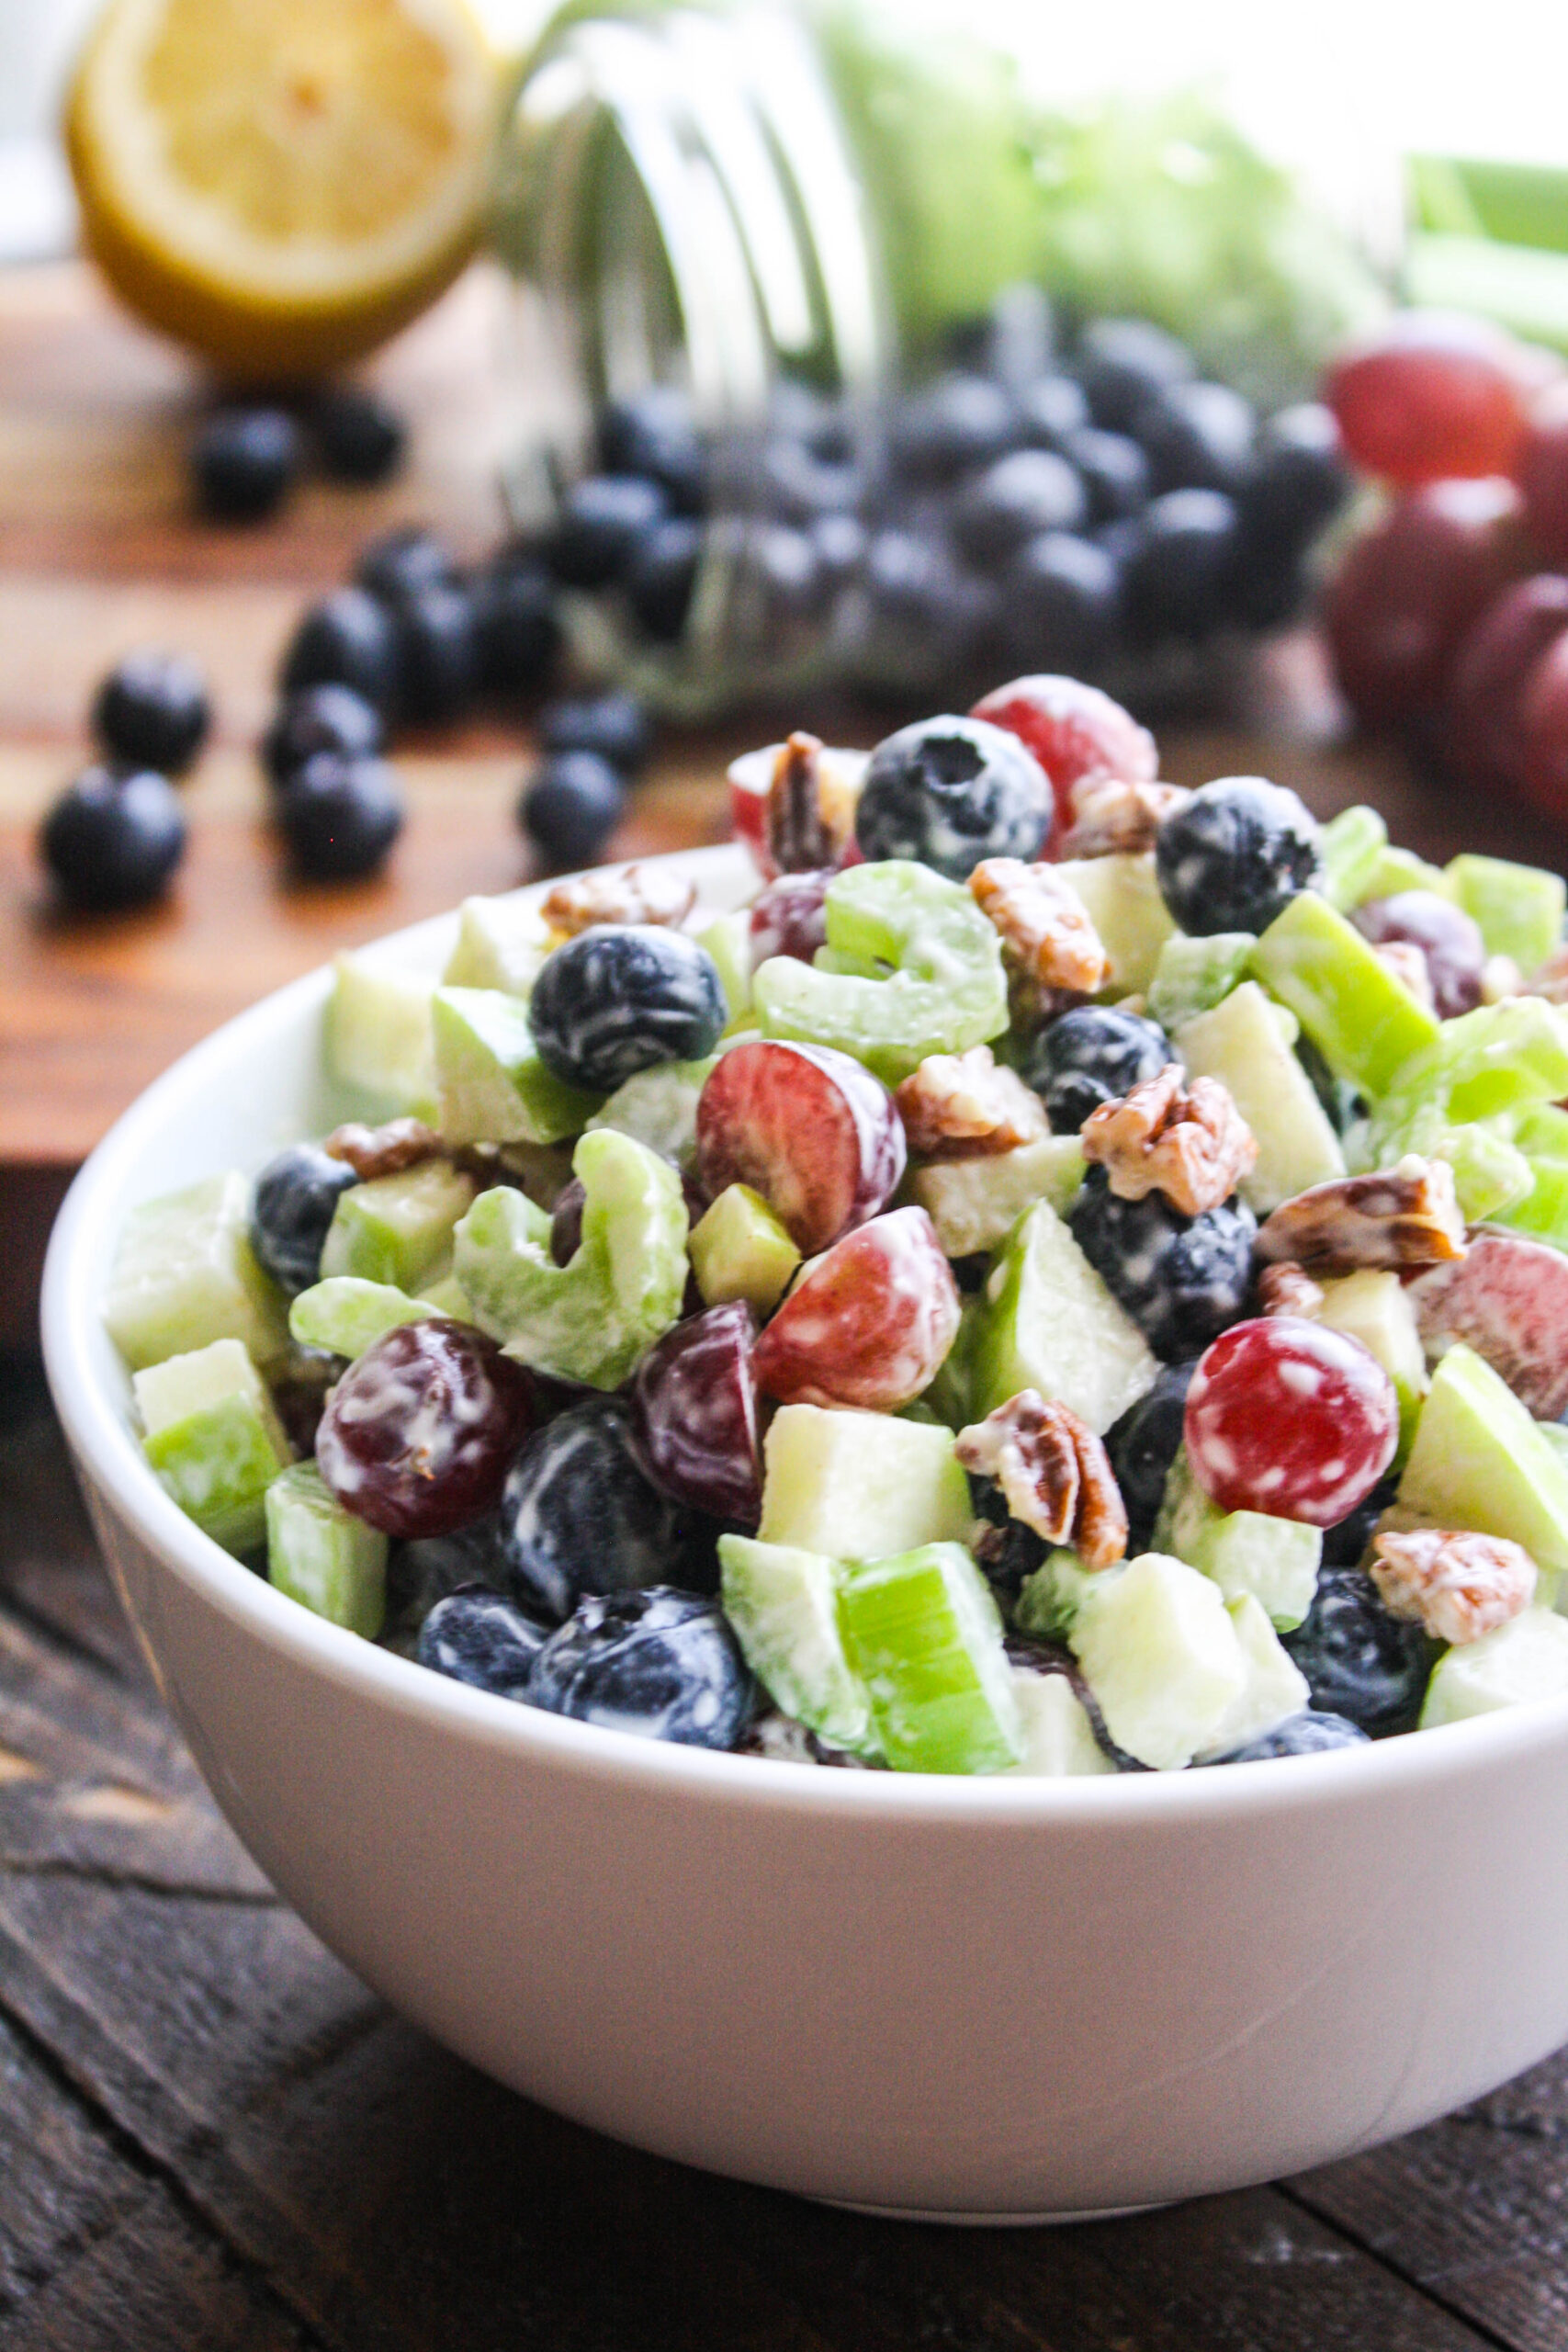 Waldorf salad is a bowl full of crunchy goodness!